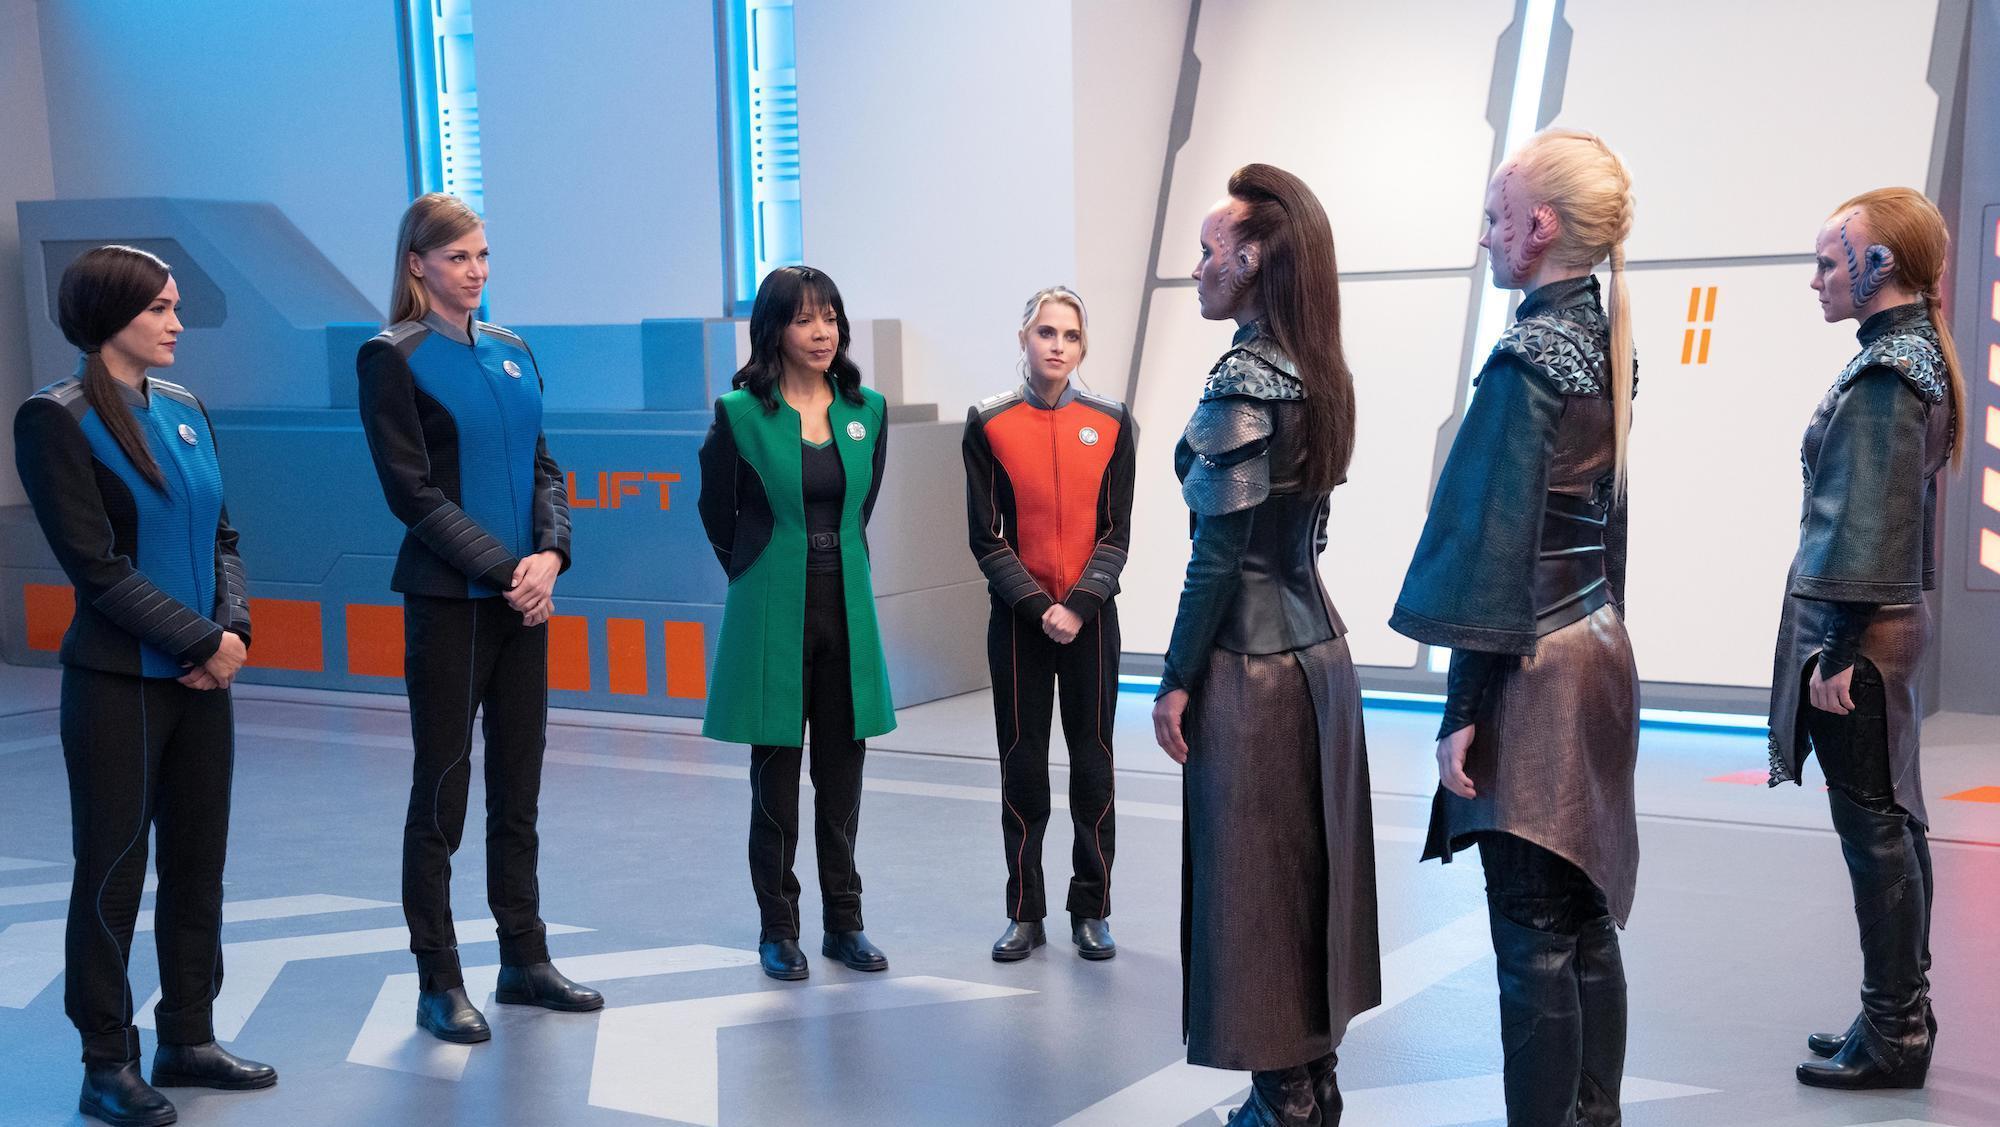 The Orville: New Horizons -- “From Unknown Graves” - Episode 307 -- The Orville discovers a Kaylon with a very special ability. Lt. Talla Keyali (Jessica Szohr), Cmdr. Kelly Grayson (Adrianne Palicki), Dr. Claire Finn (Penny Johnson Jerald), and Charly Burke (Anne Winters), shown. (Photo by: Greg Gayne/Hulu)